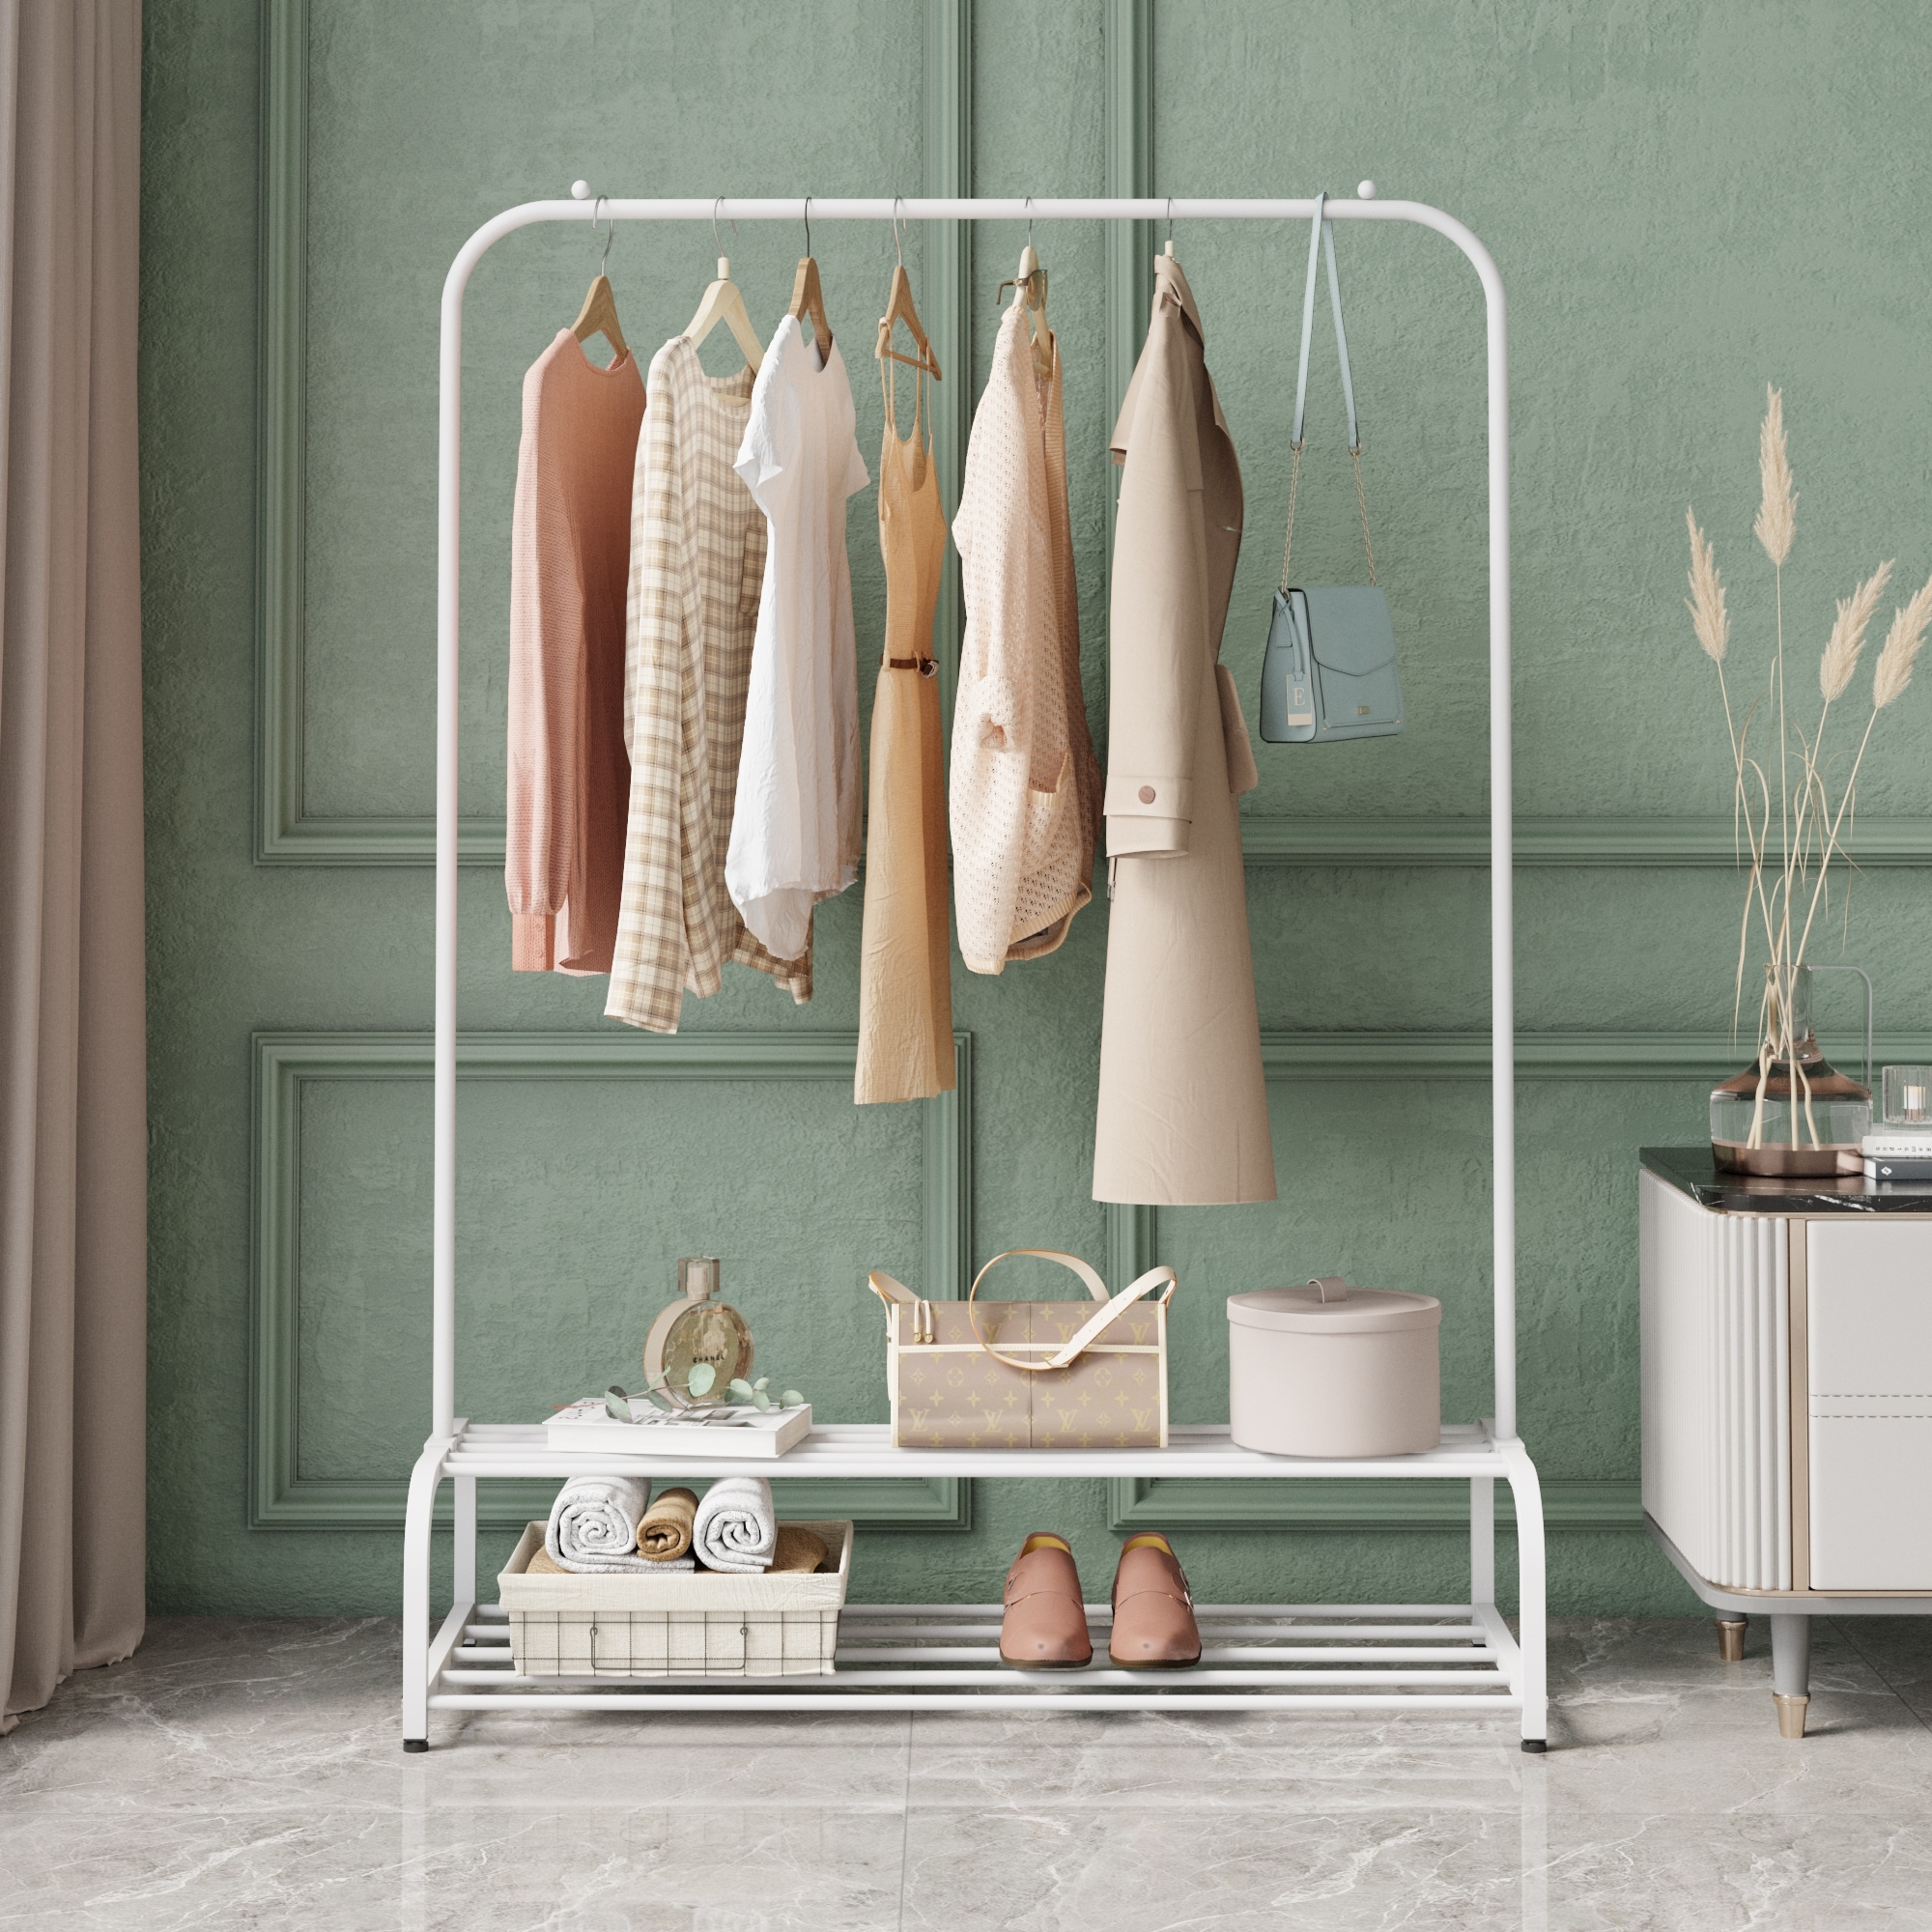 https://ak1.ostkcdn.com/images/products/is/images/direct/cc0ef8afb18ff2b775d9faff075c587cca0e6eb0/Clothing-Garment-Rack-with-Shelves-Metal-Cloth-Hanger-Rack.jpg